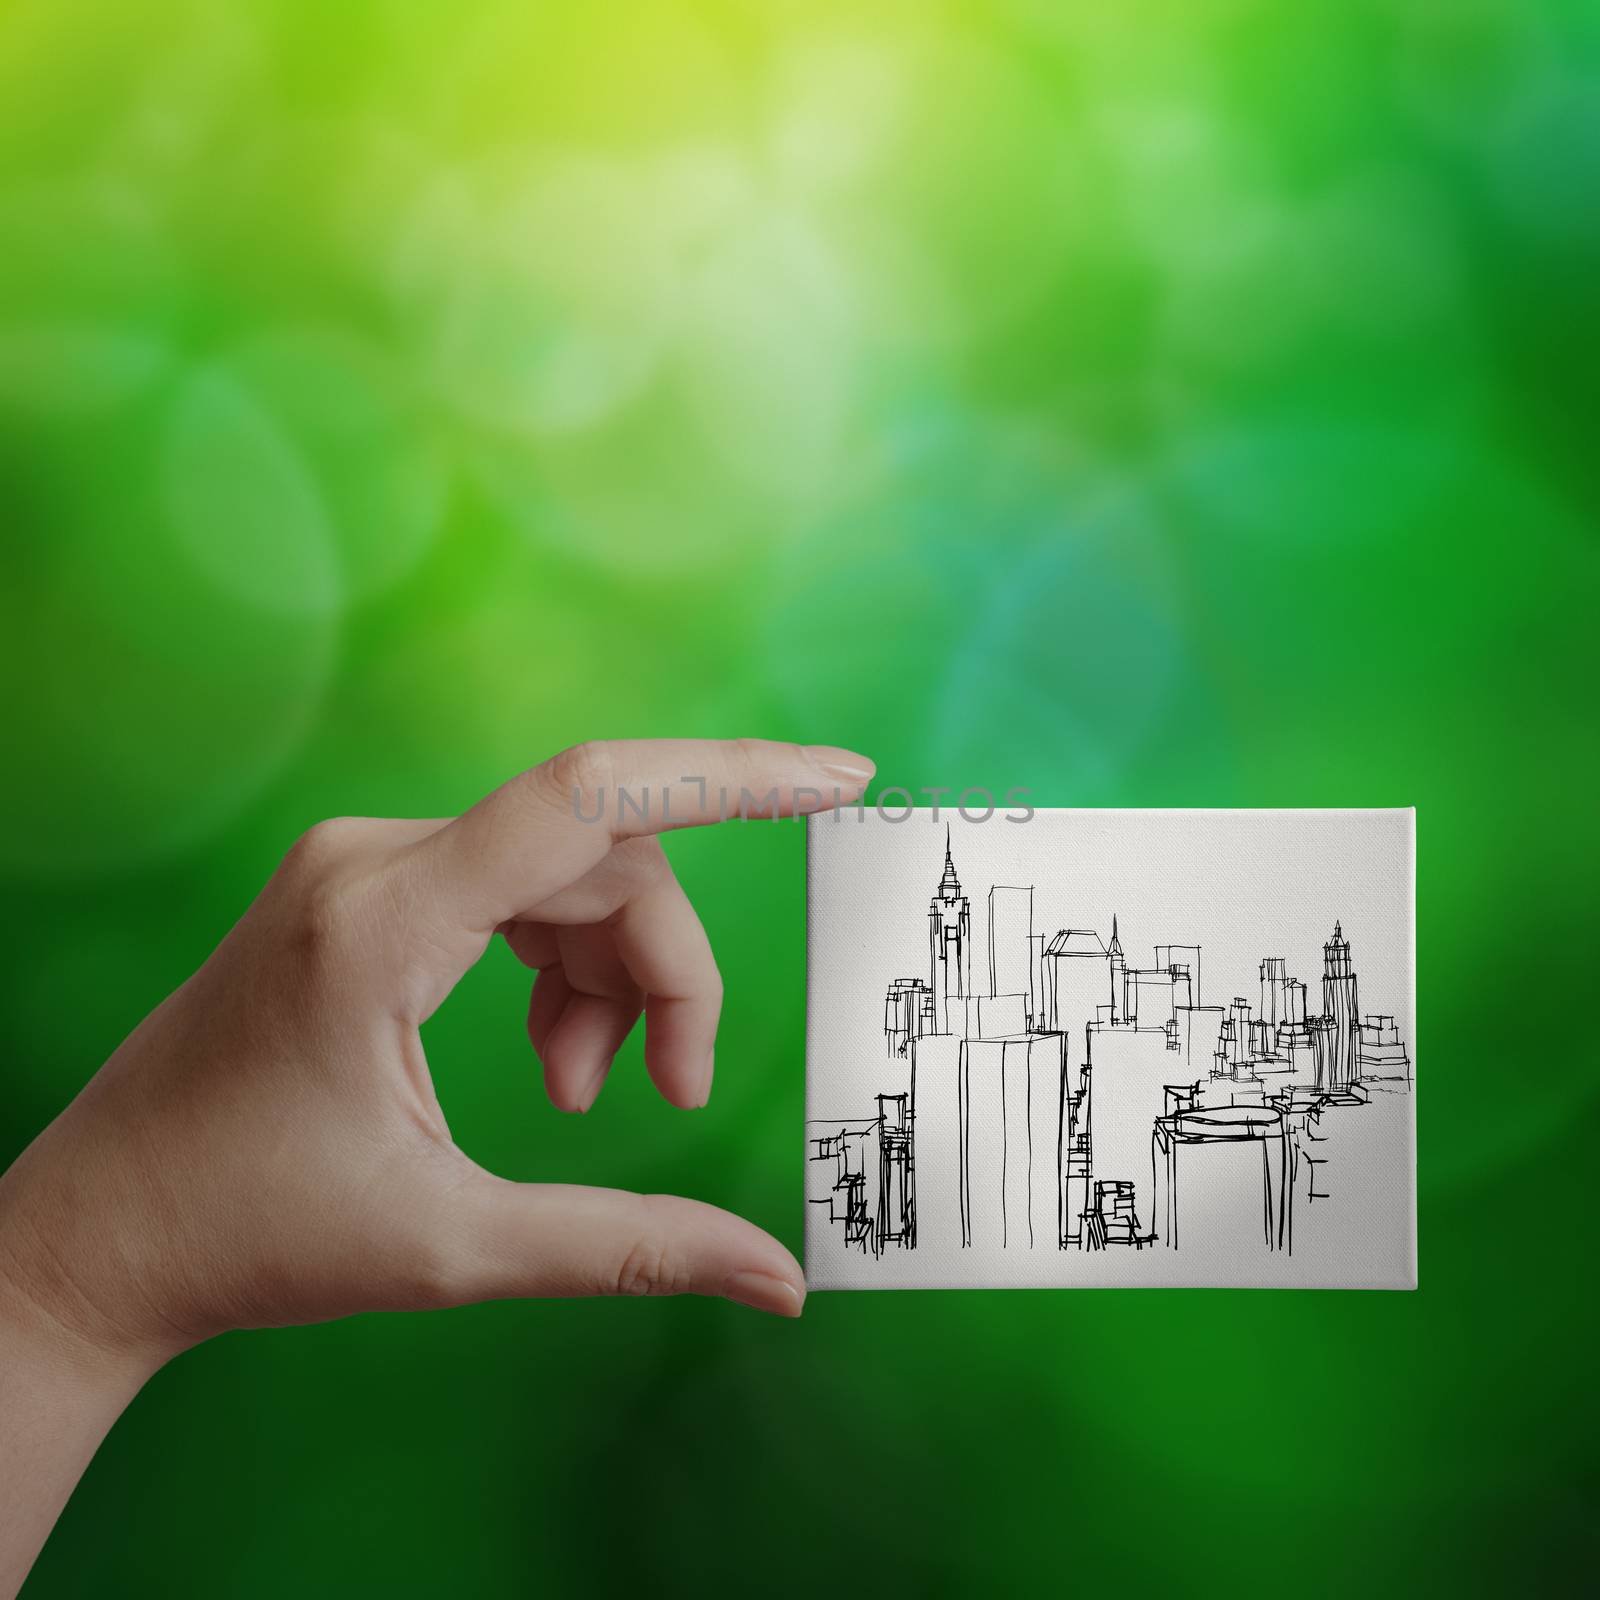 hand showing hand drawn city on canvas board on green nature background as concept